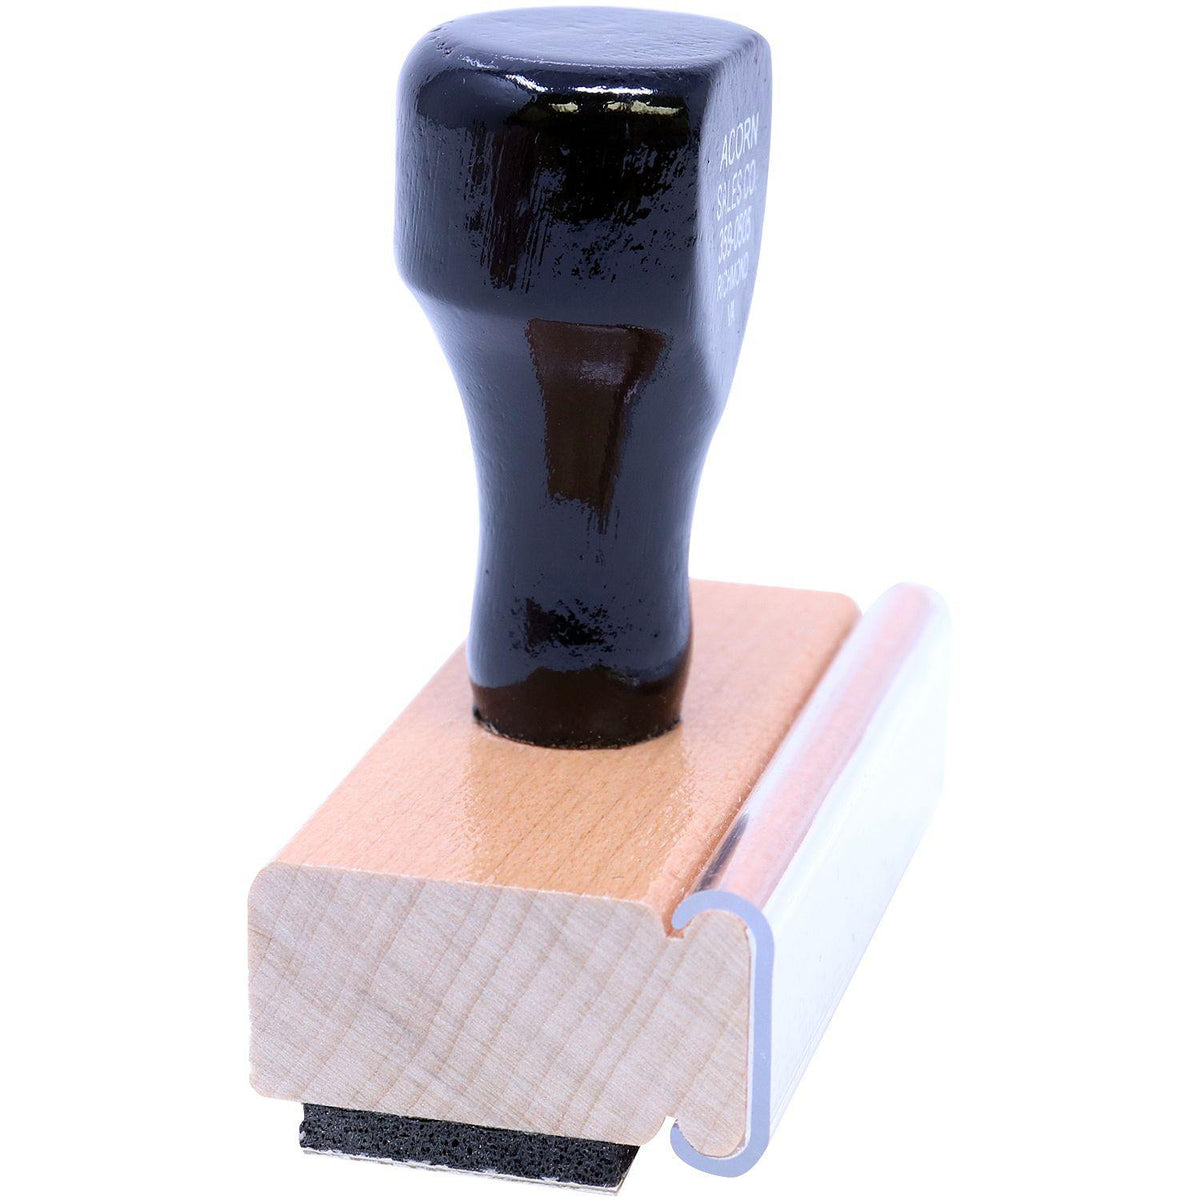 Side View of Large Expedite Rubber Stamp at an Angle